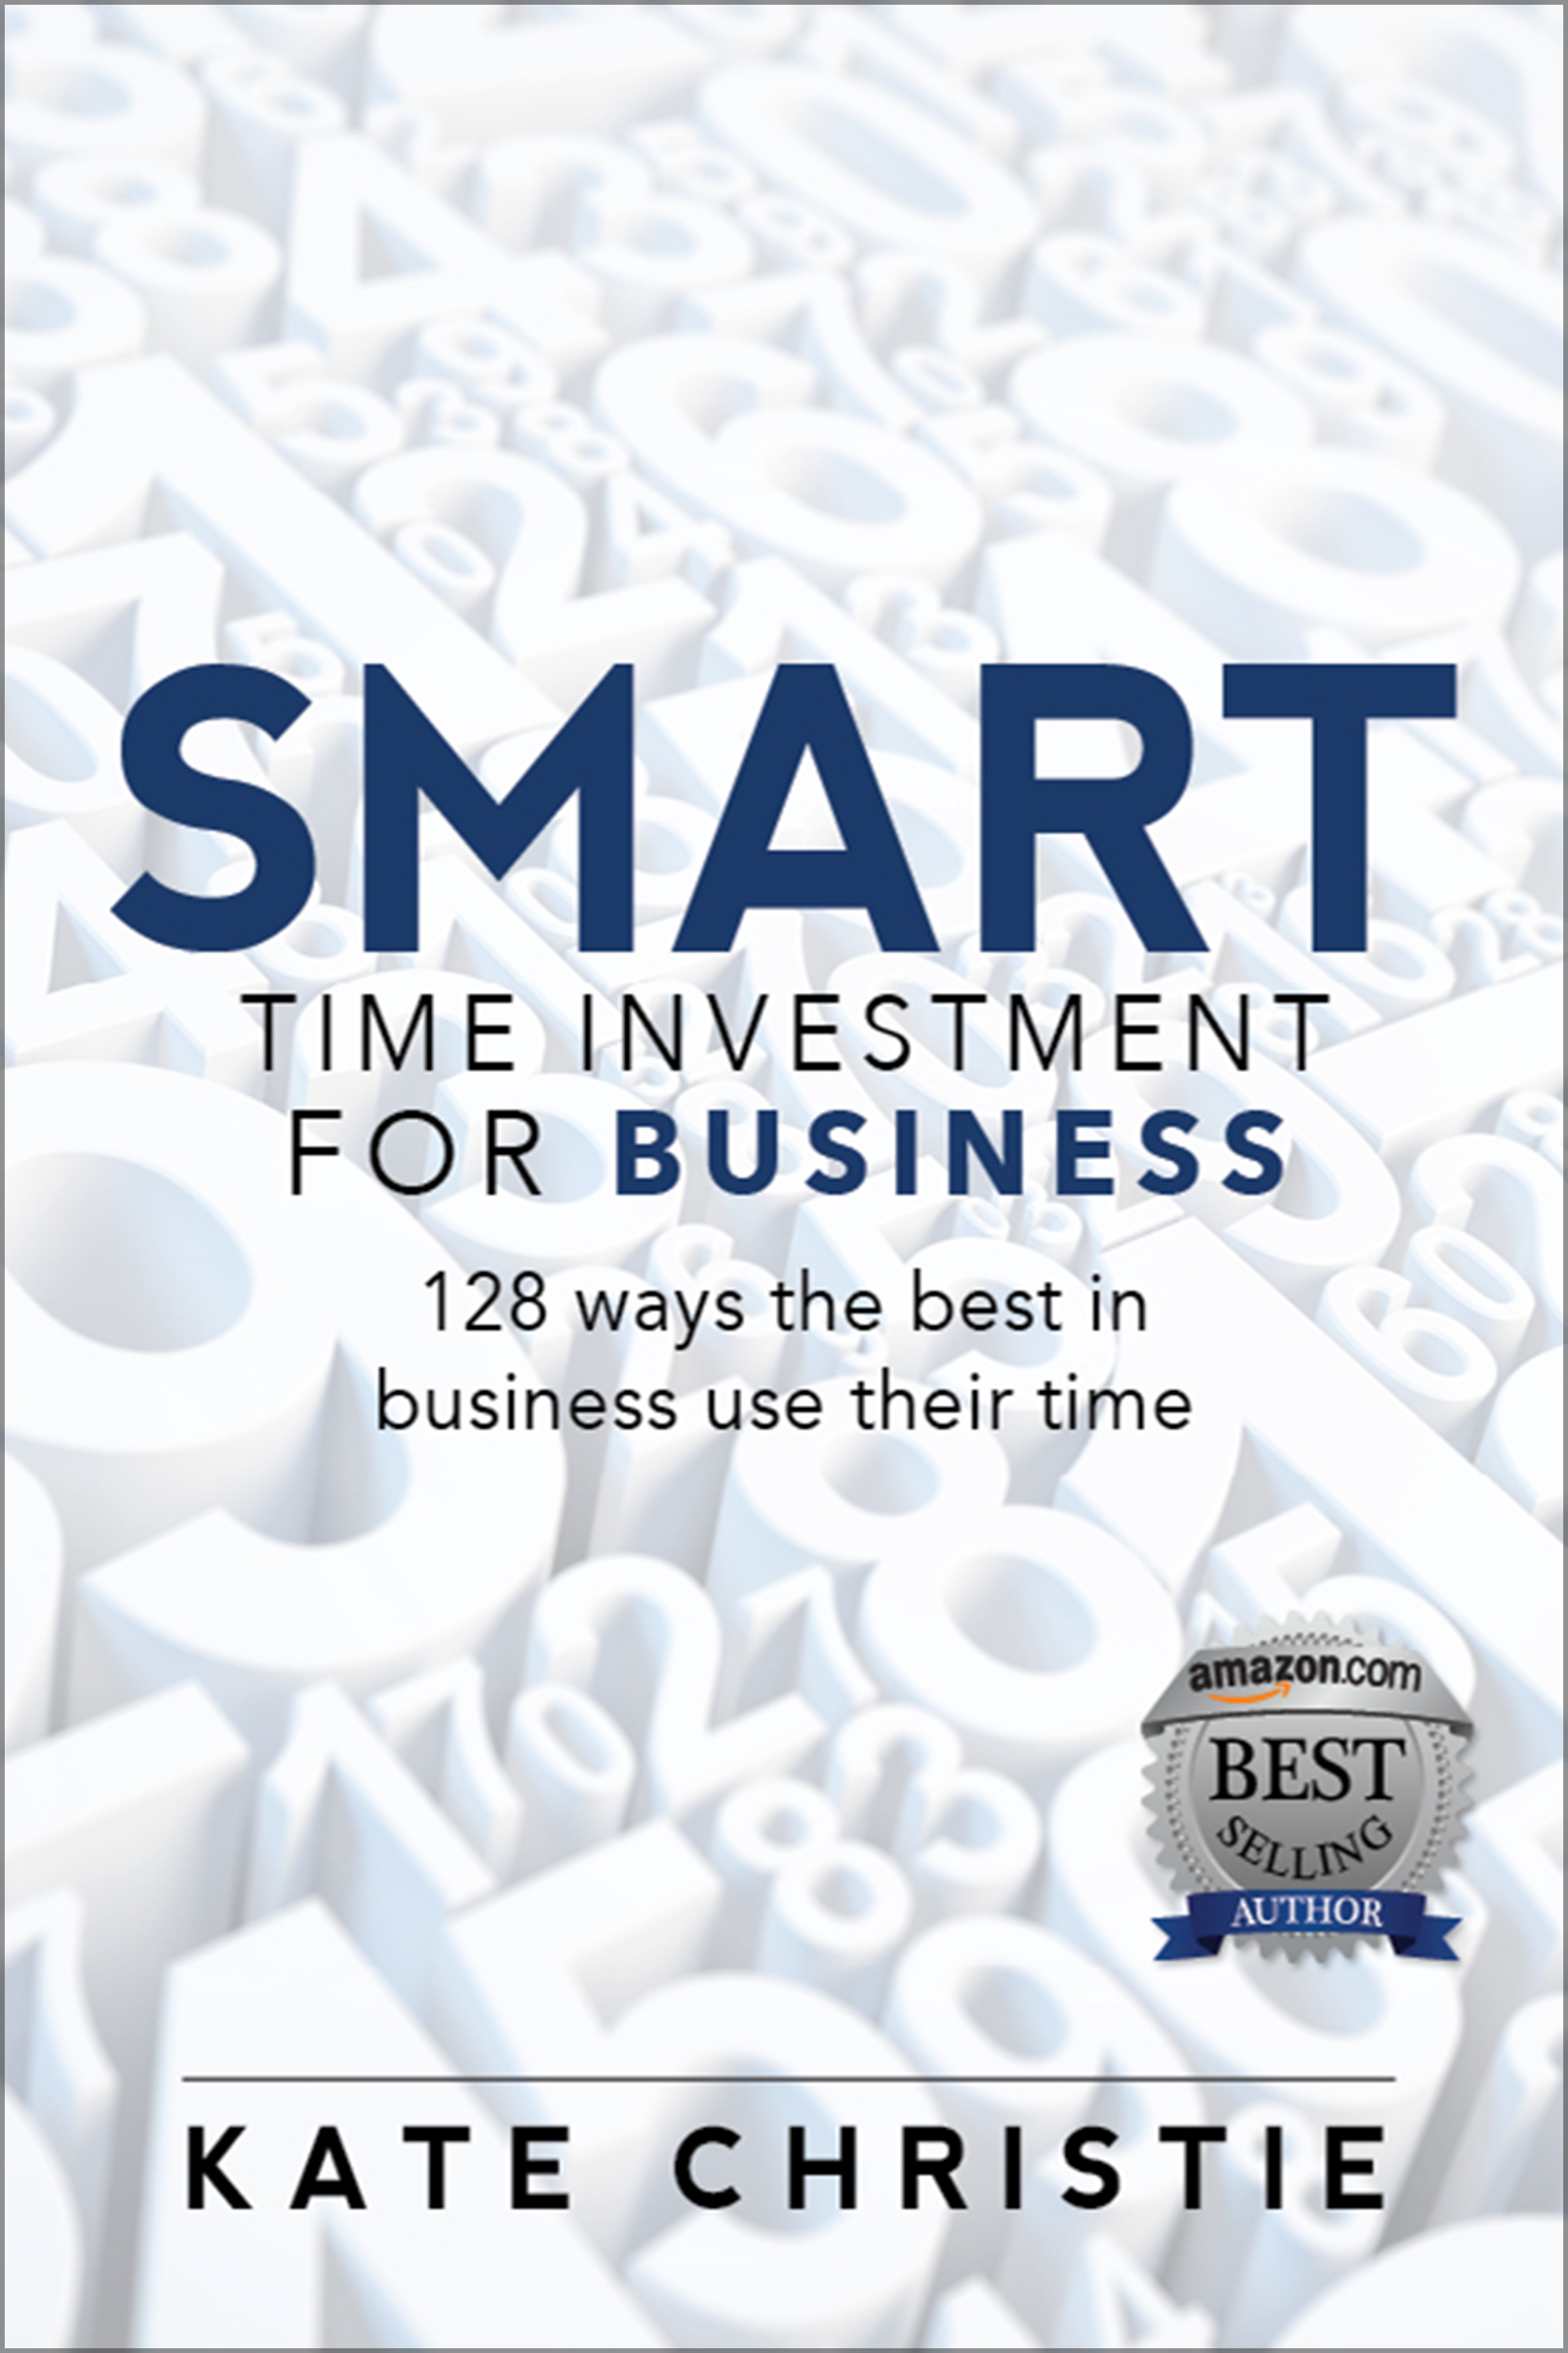 SMART Time Investment for Business cover.jpg